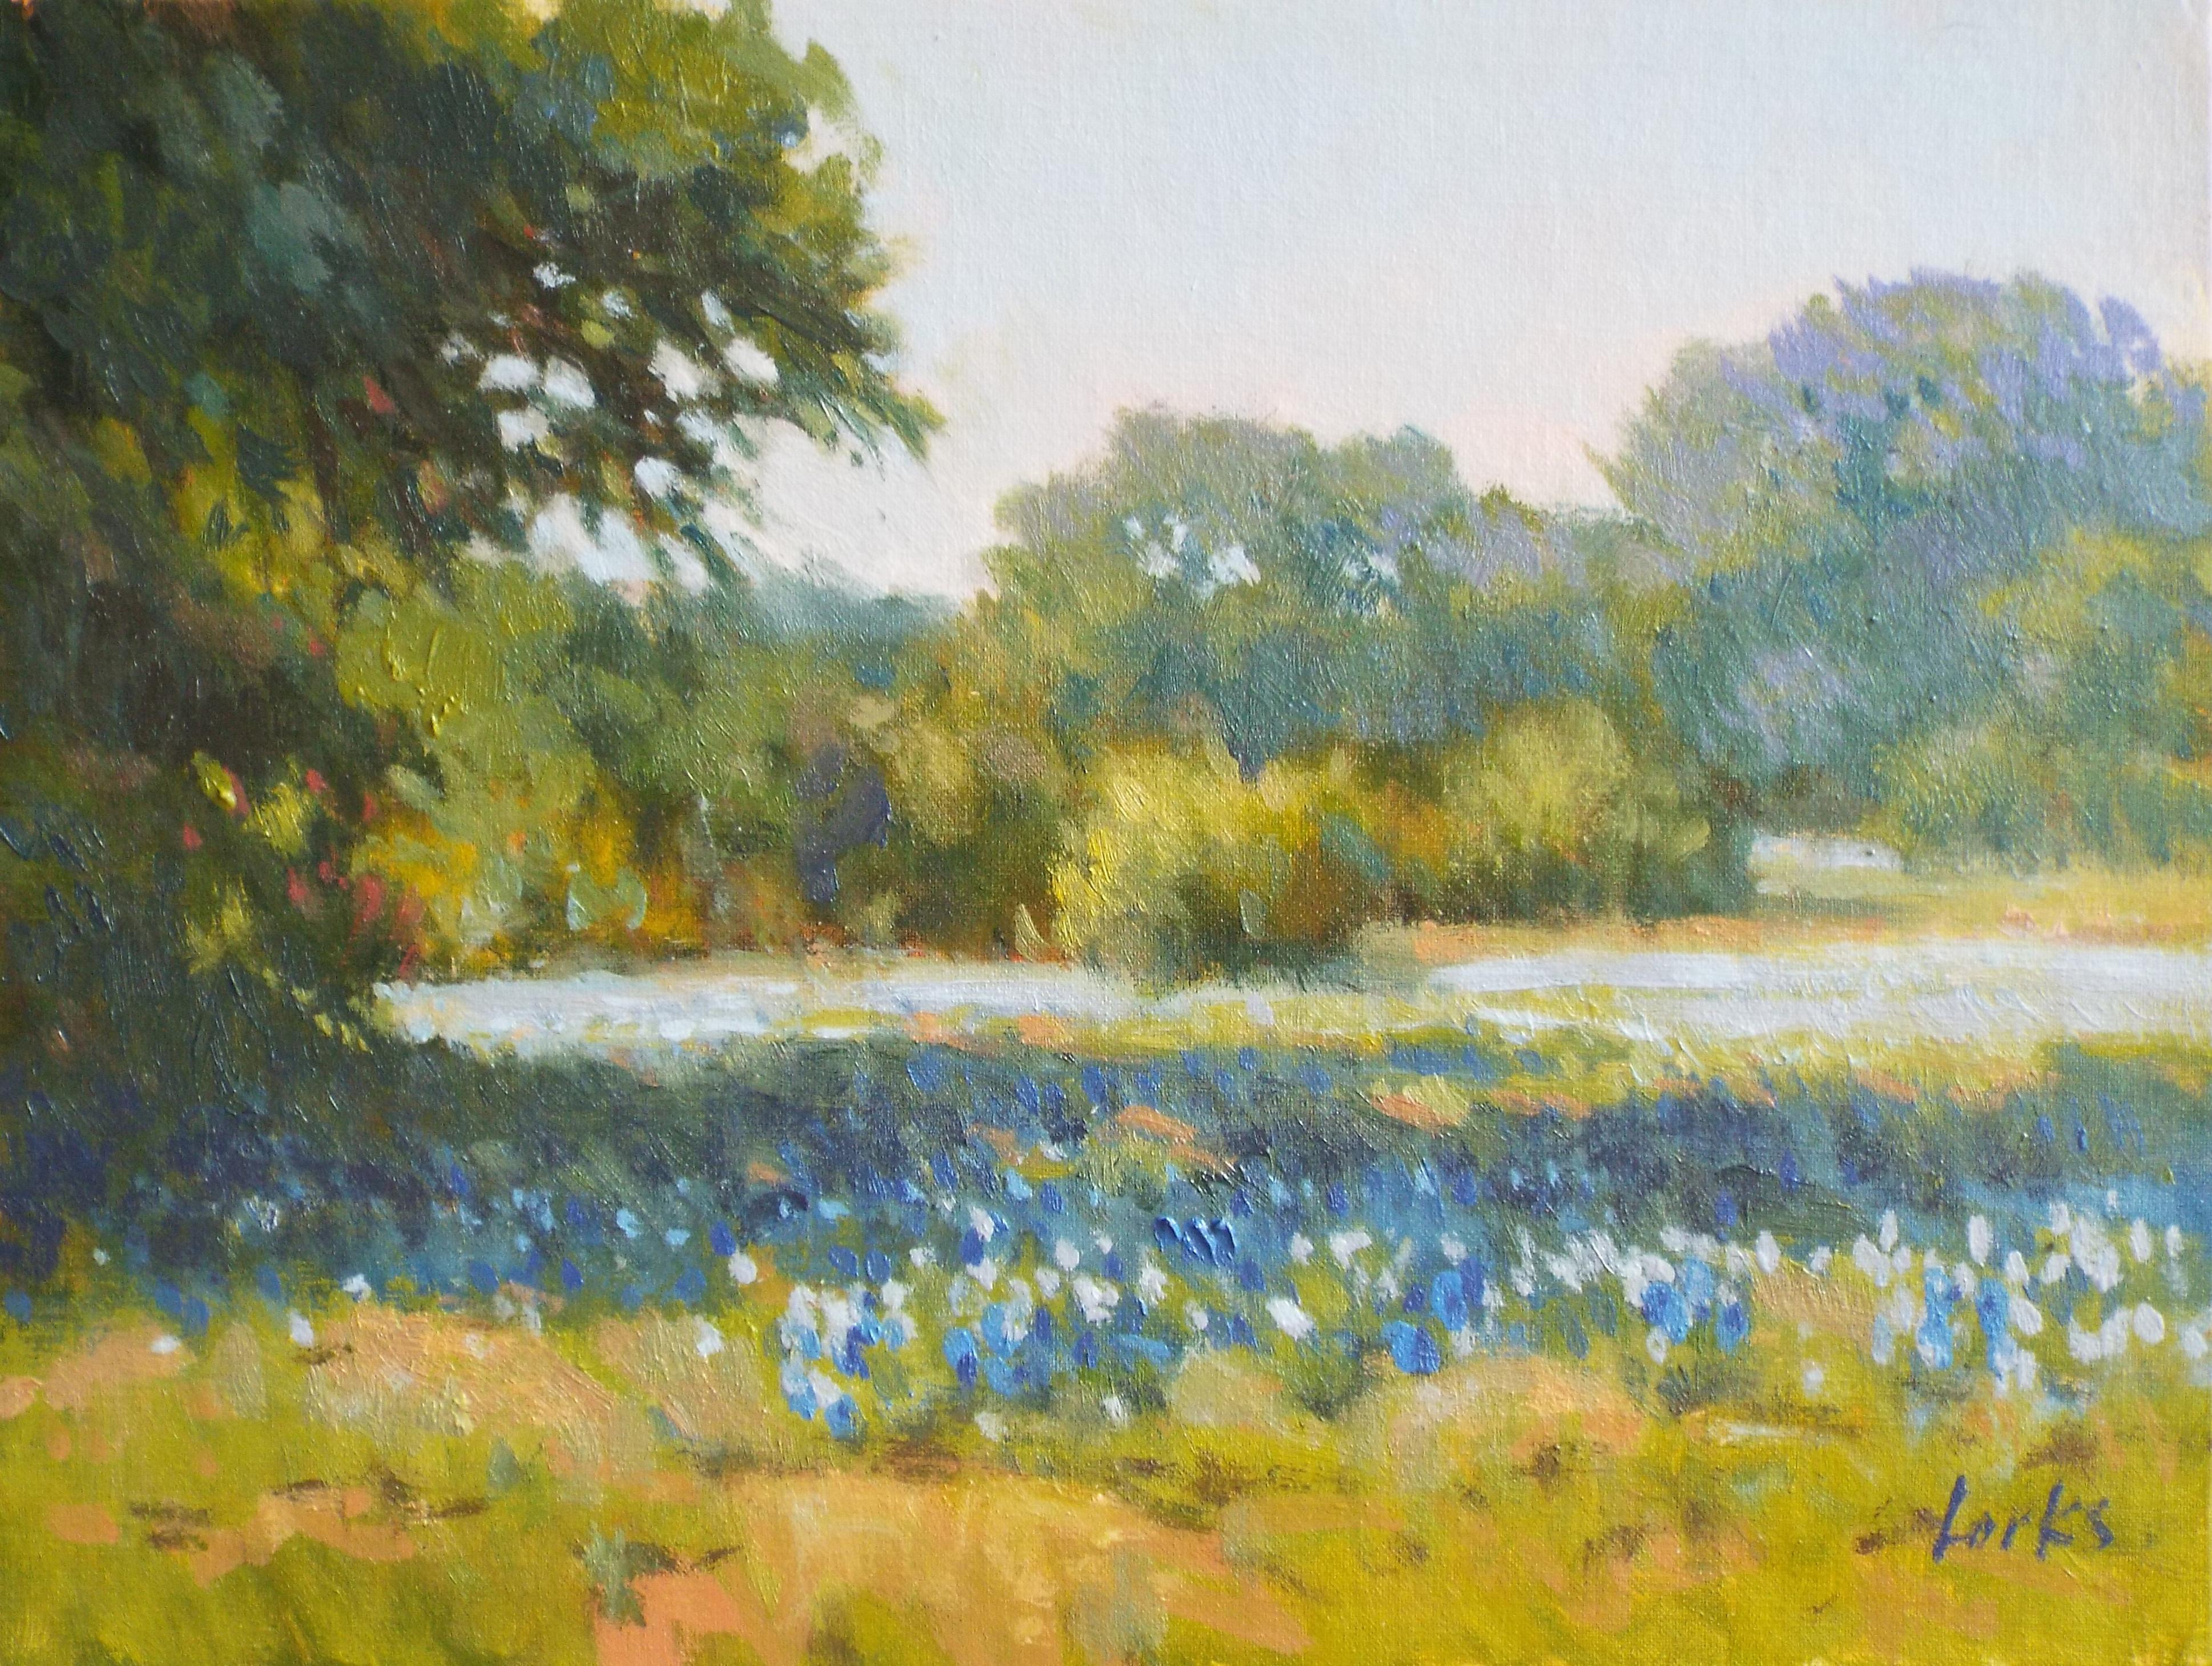 Master the Art of Drawing a Bluebonnet: A Step-by-Step Guide